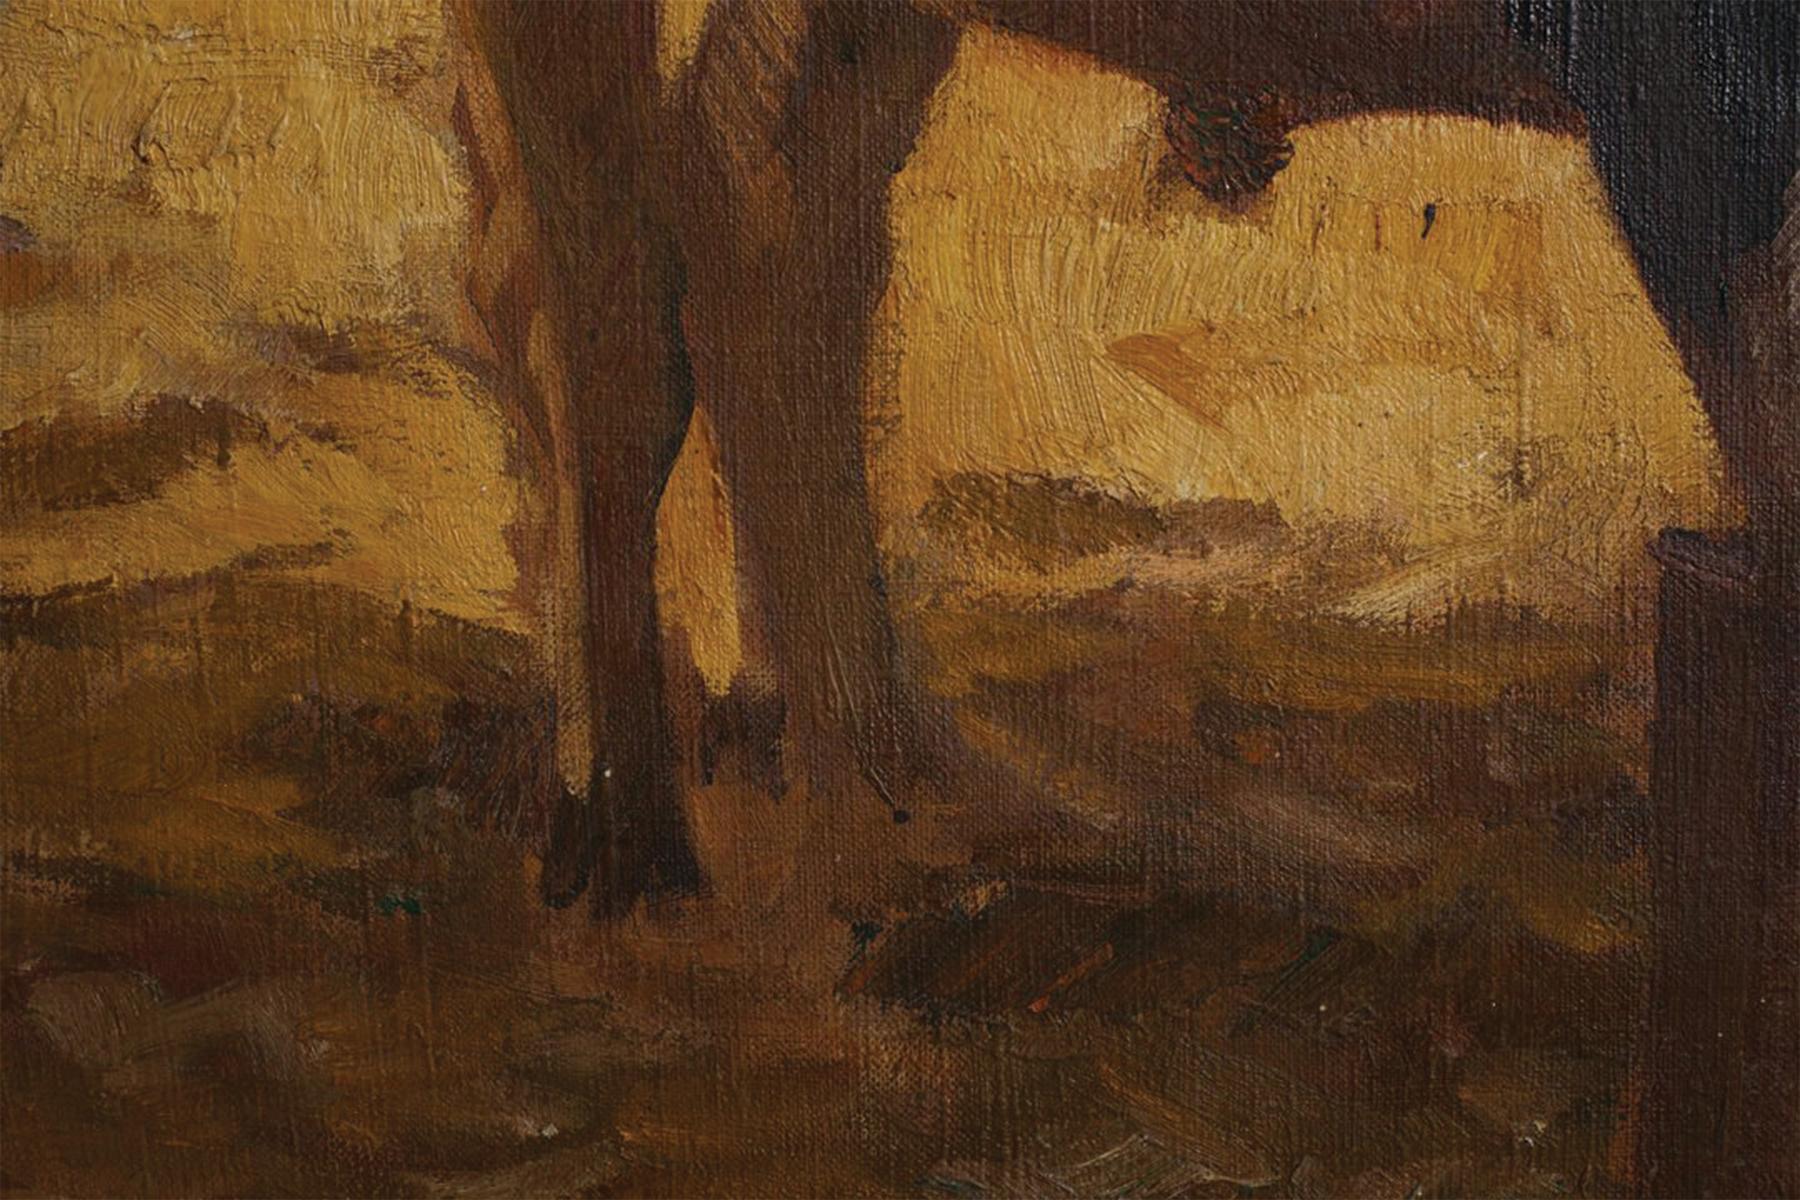 Henry George Keller (American, 1868-1949)
Cattle Series Study, 1901
Oil on canvas
Signed verso
22 x 26 inches
28.5 x 33 inches, framed

Keller, a leading painter in Cleveland, was born at sea, off Nova Scotia on April 3, 1869.  His earliest training